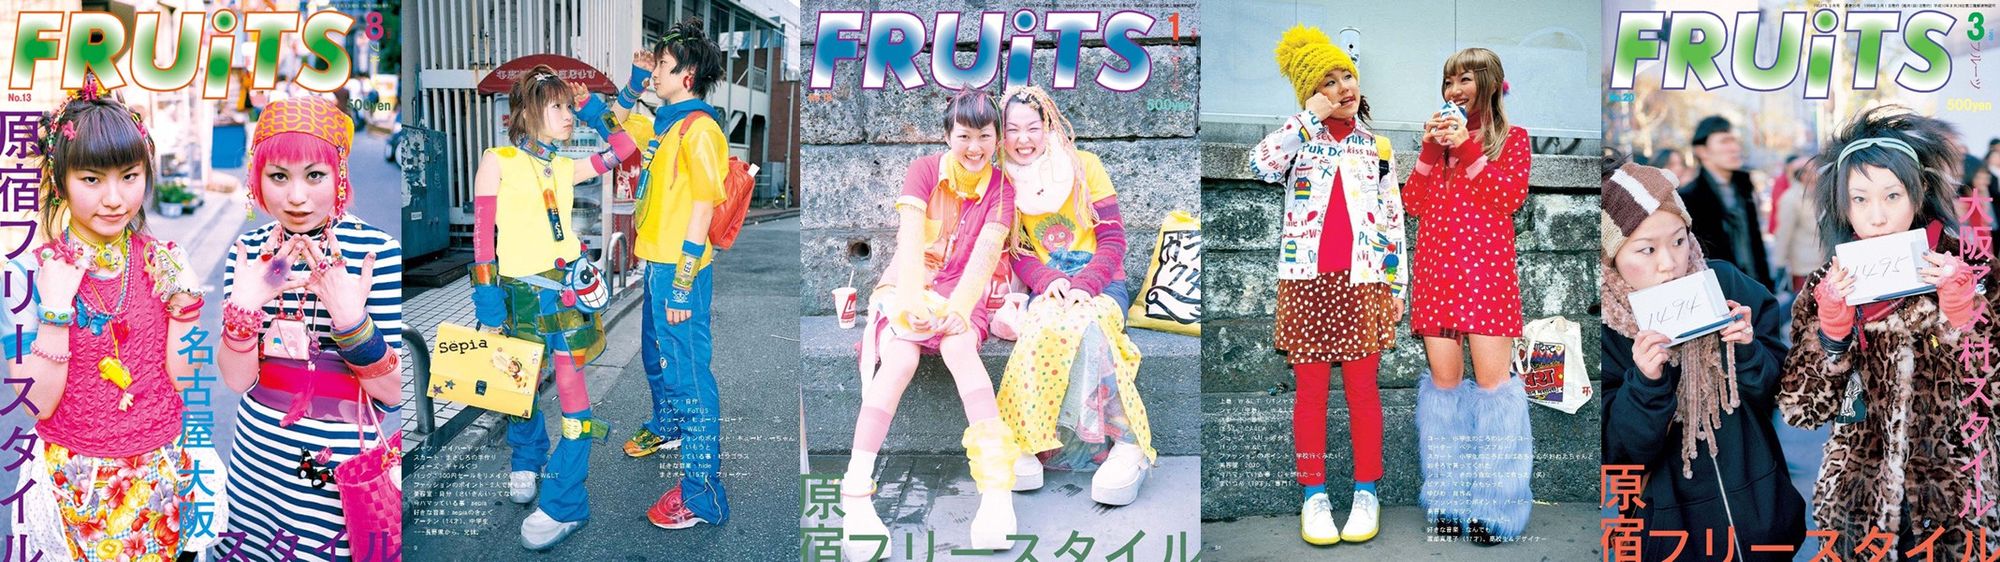 FRUiTS was a very influential fashion photomagazine documenting subcultural street fashion in Tokyo through the late 90s and 00s.